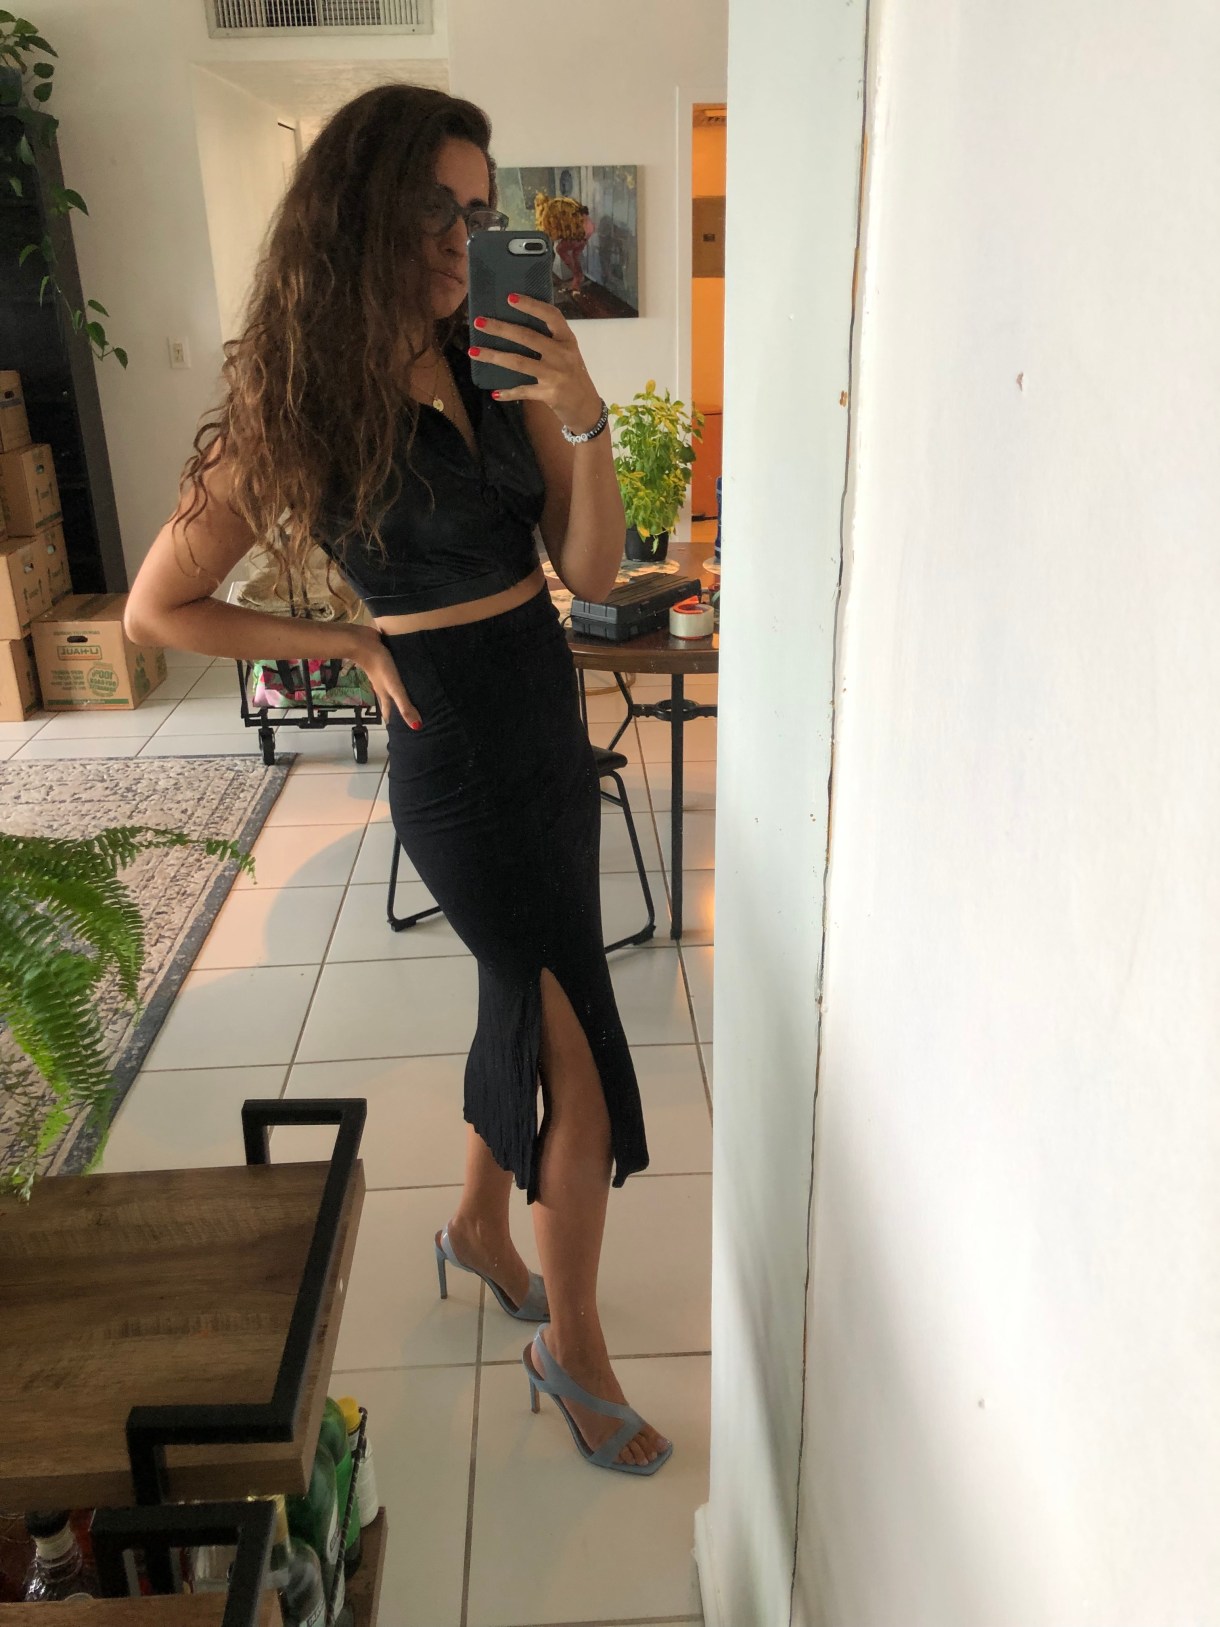 Kayla Kumari Upadhyaya wears a cropped pleather zip-up tank over a black slit midi jersey skirt and strappy pale blue square-toe heels. She has her hand on her hib and is taking a selfie in the mirror.